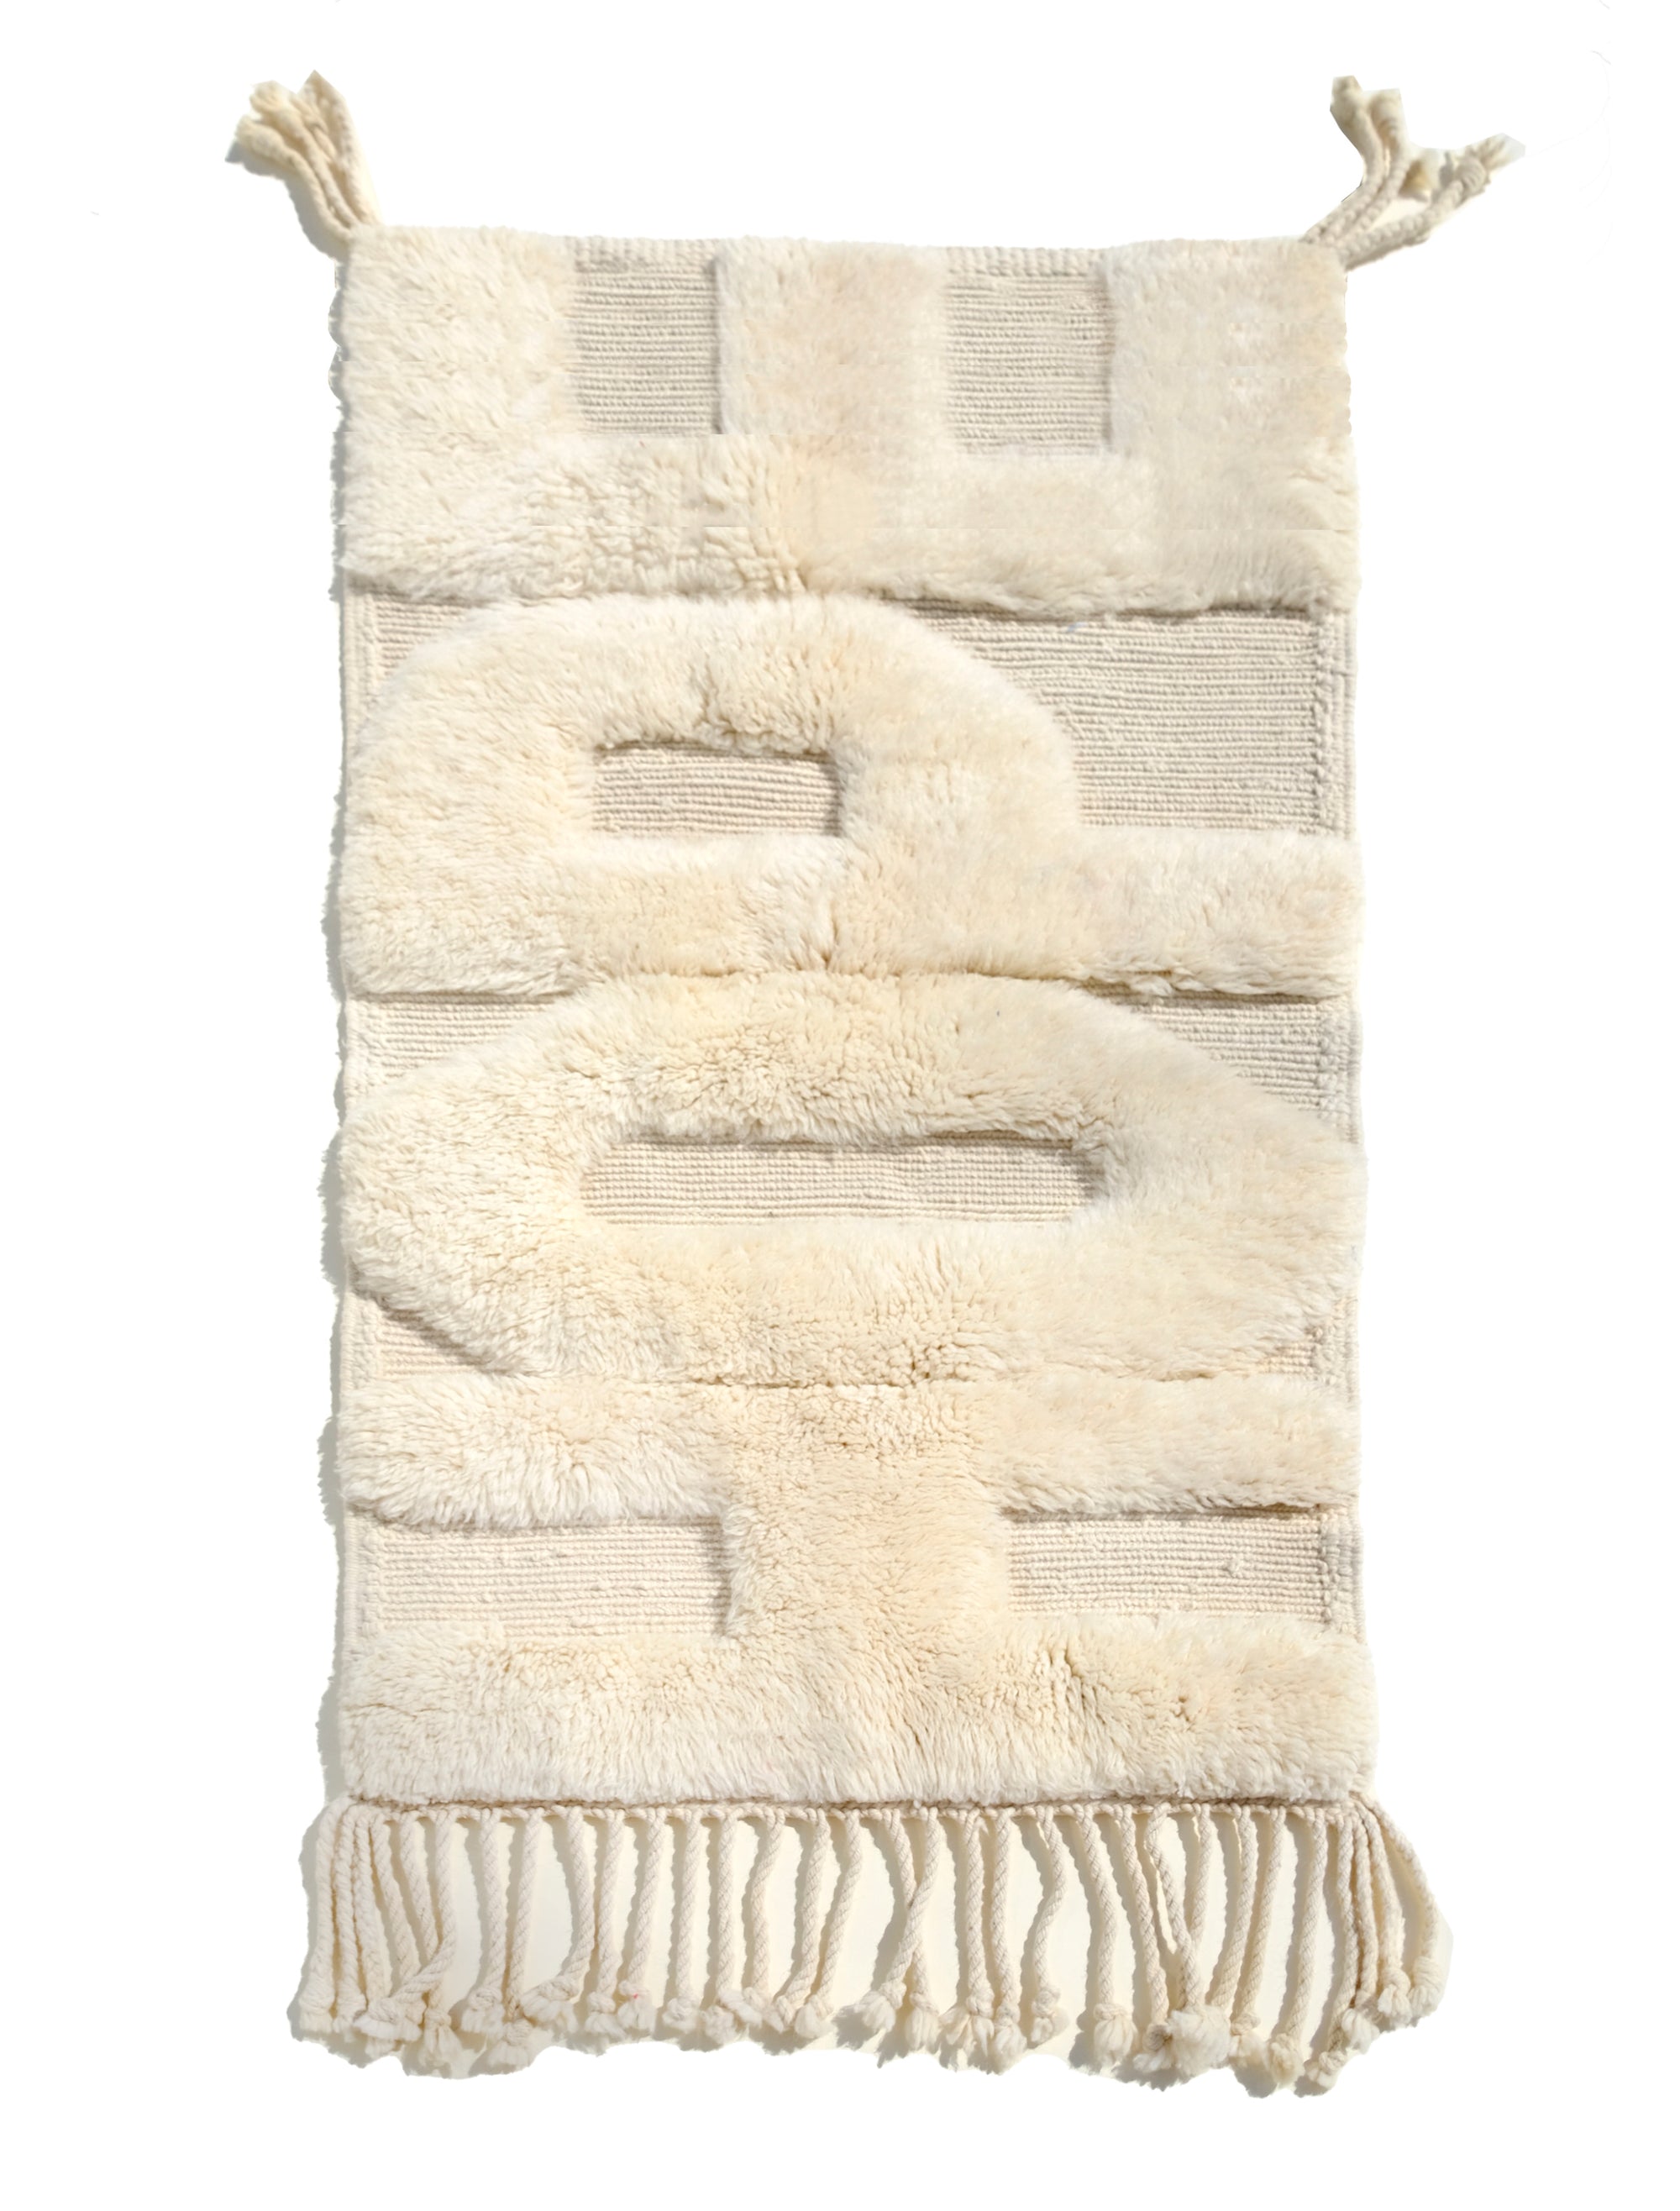 Introducing our 'Ivory Fuzzed Hope Rug,' a masterful blend of timeless sophistication and vibrant playfulness. Crafted with meticulous care, this rug features bold knotted 'Hope' letters that bring a touch of uniqueness to your space. The charming texture and spirited design infuse your home with positive energy, creating a perfect balance of classic elegance and joyful exuberance.